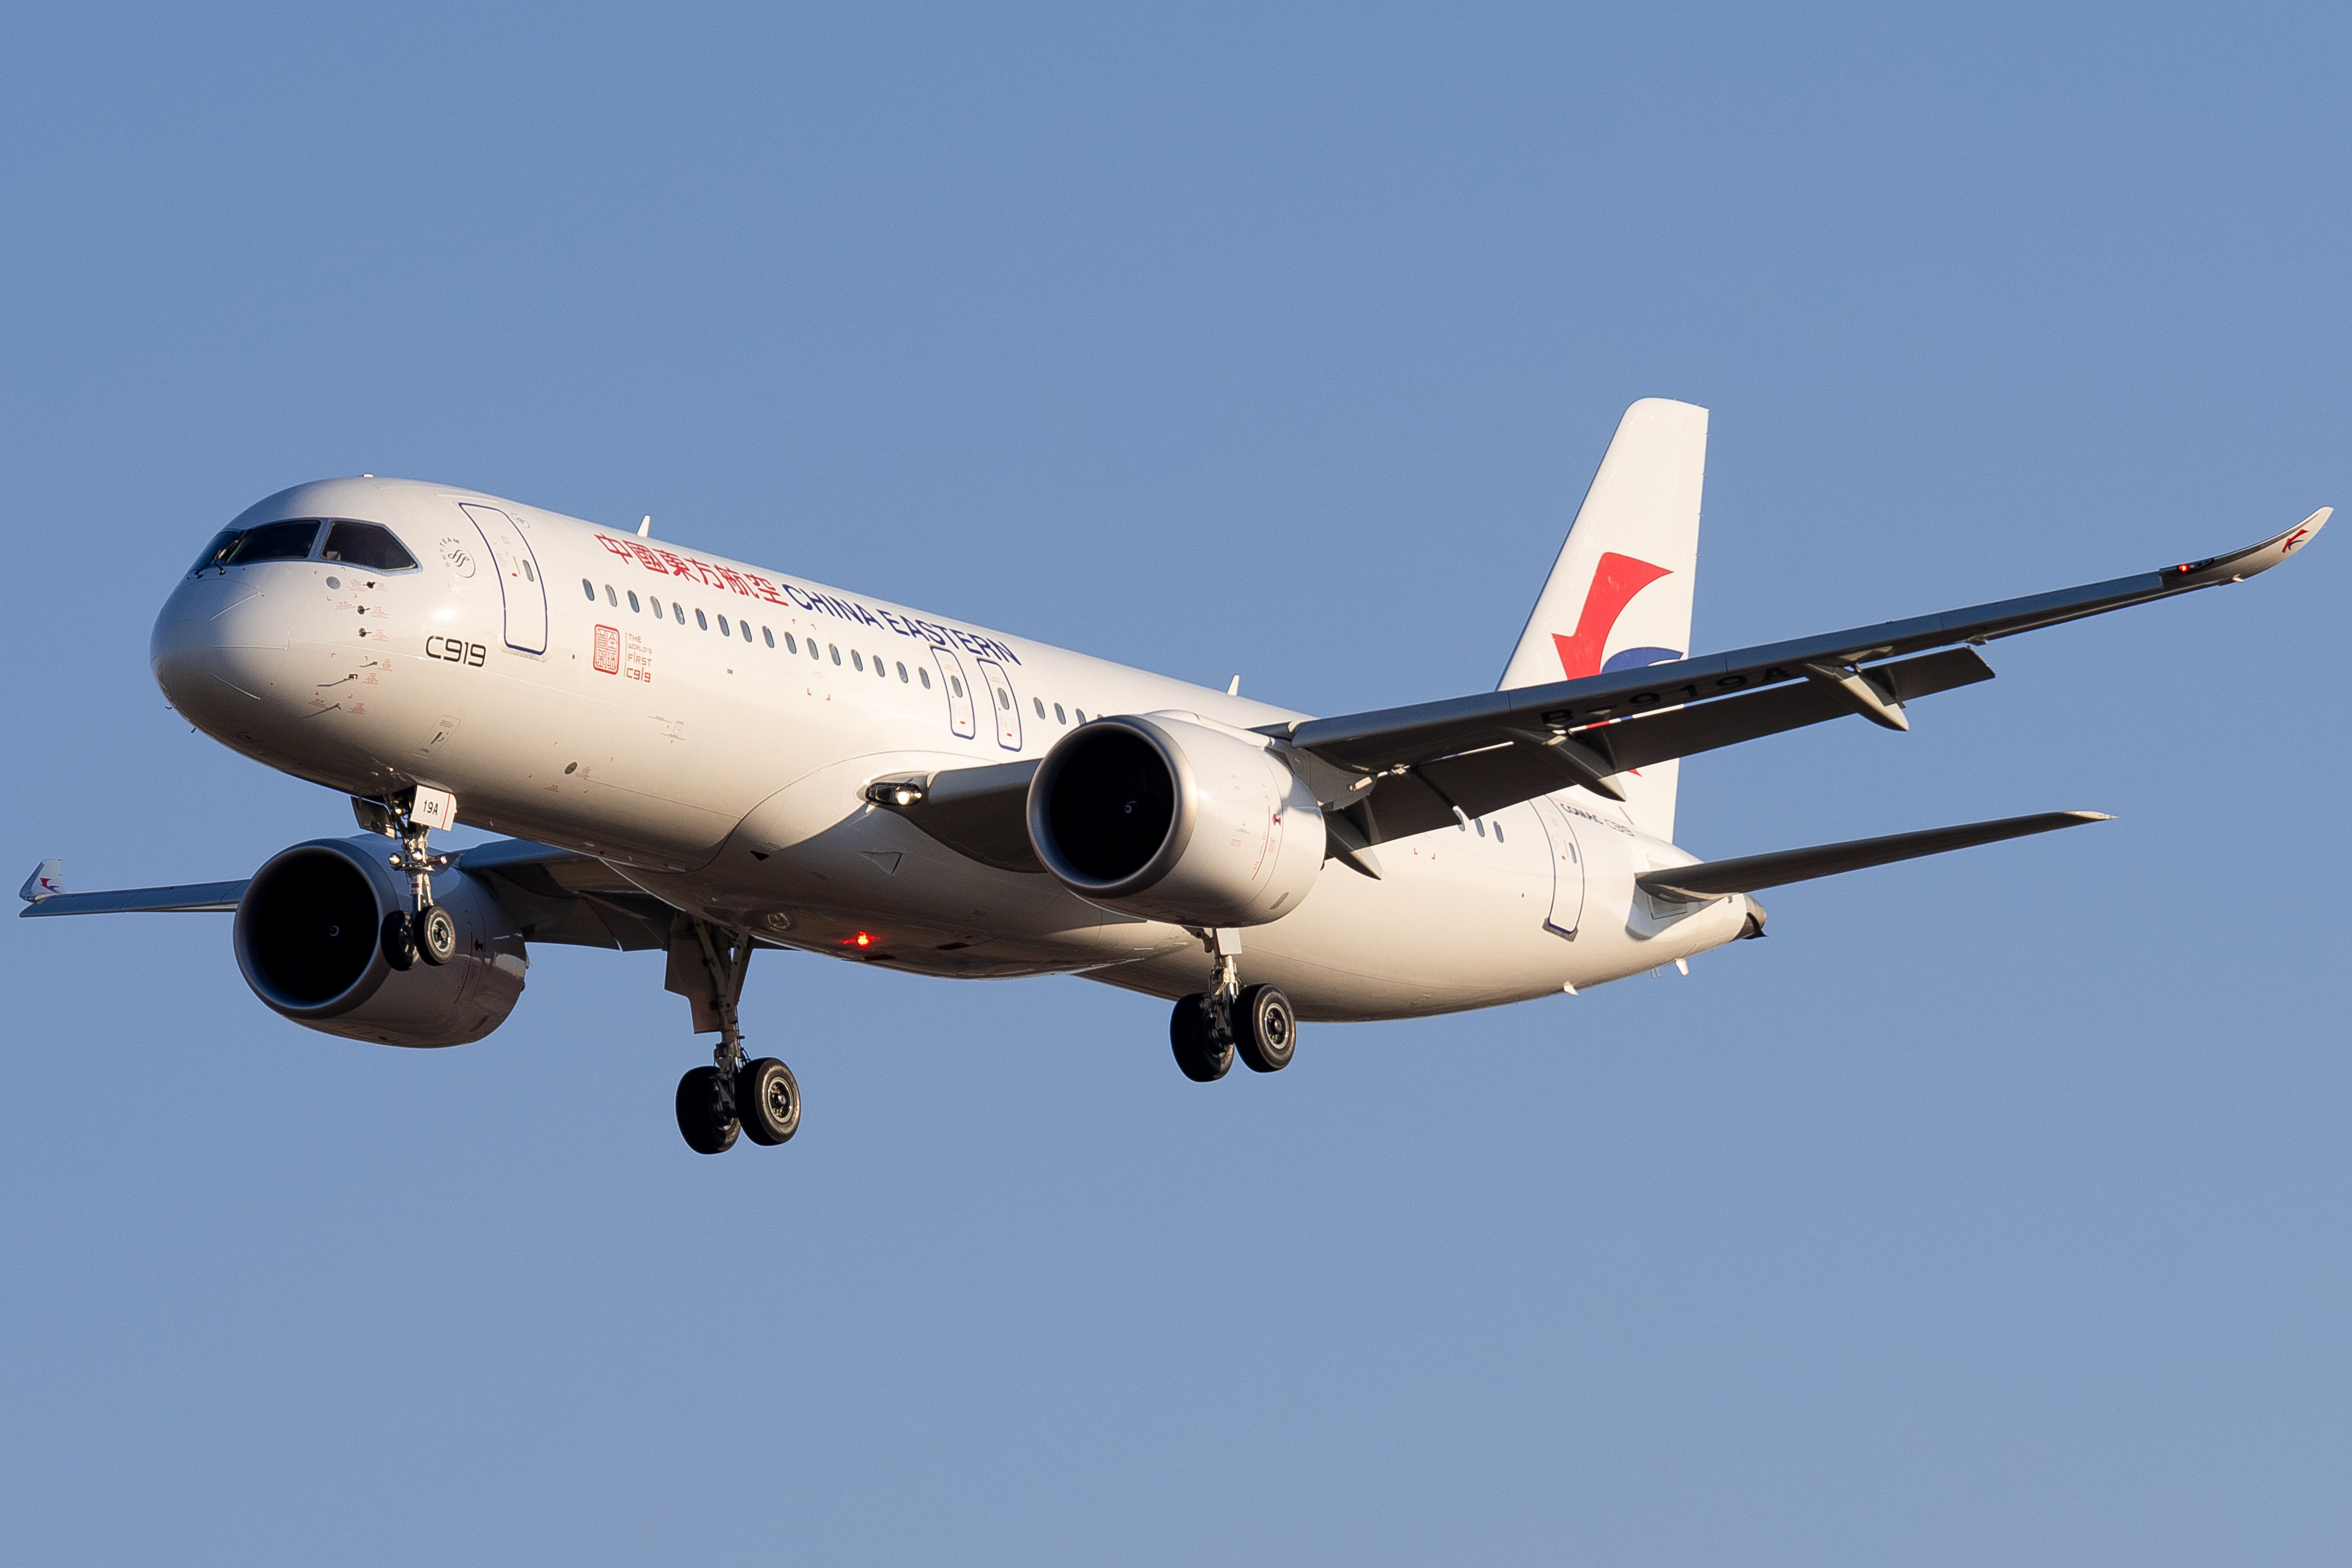 China Eastern Airlines COMAC C919 | B-919A